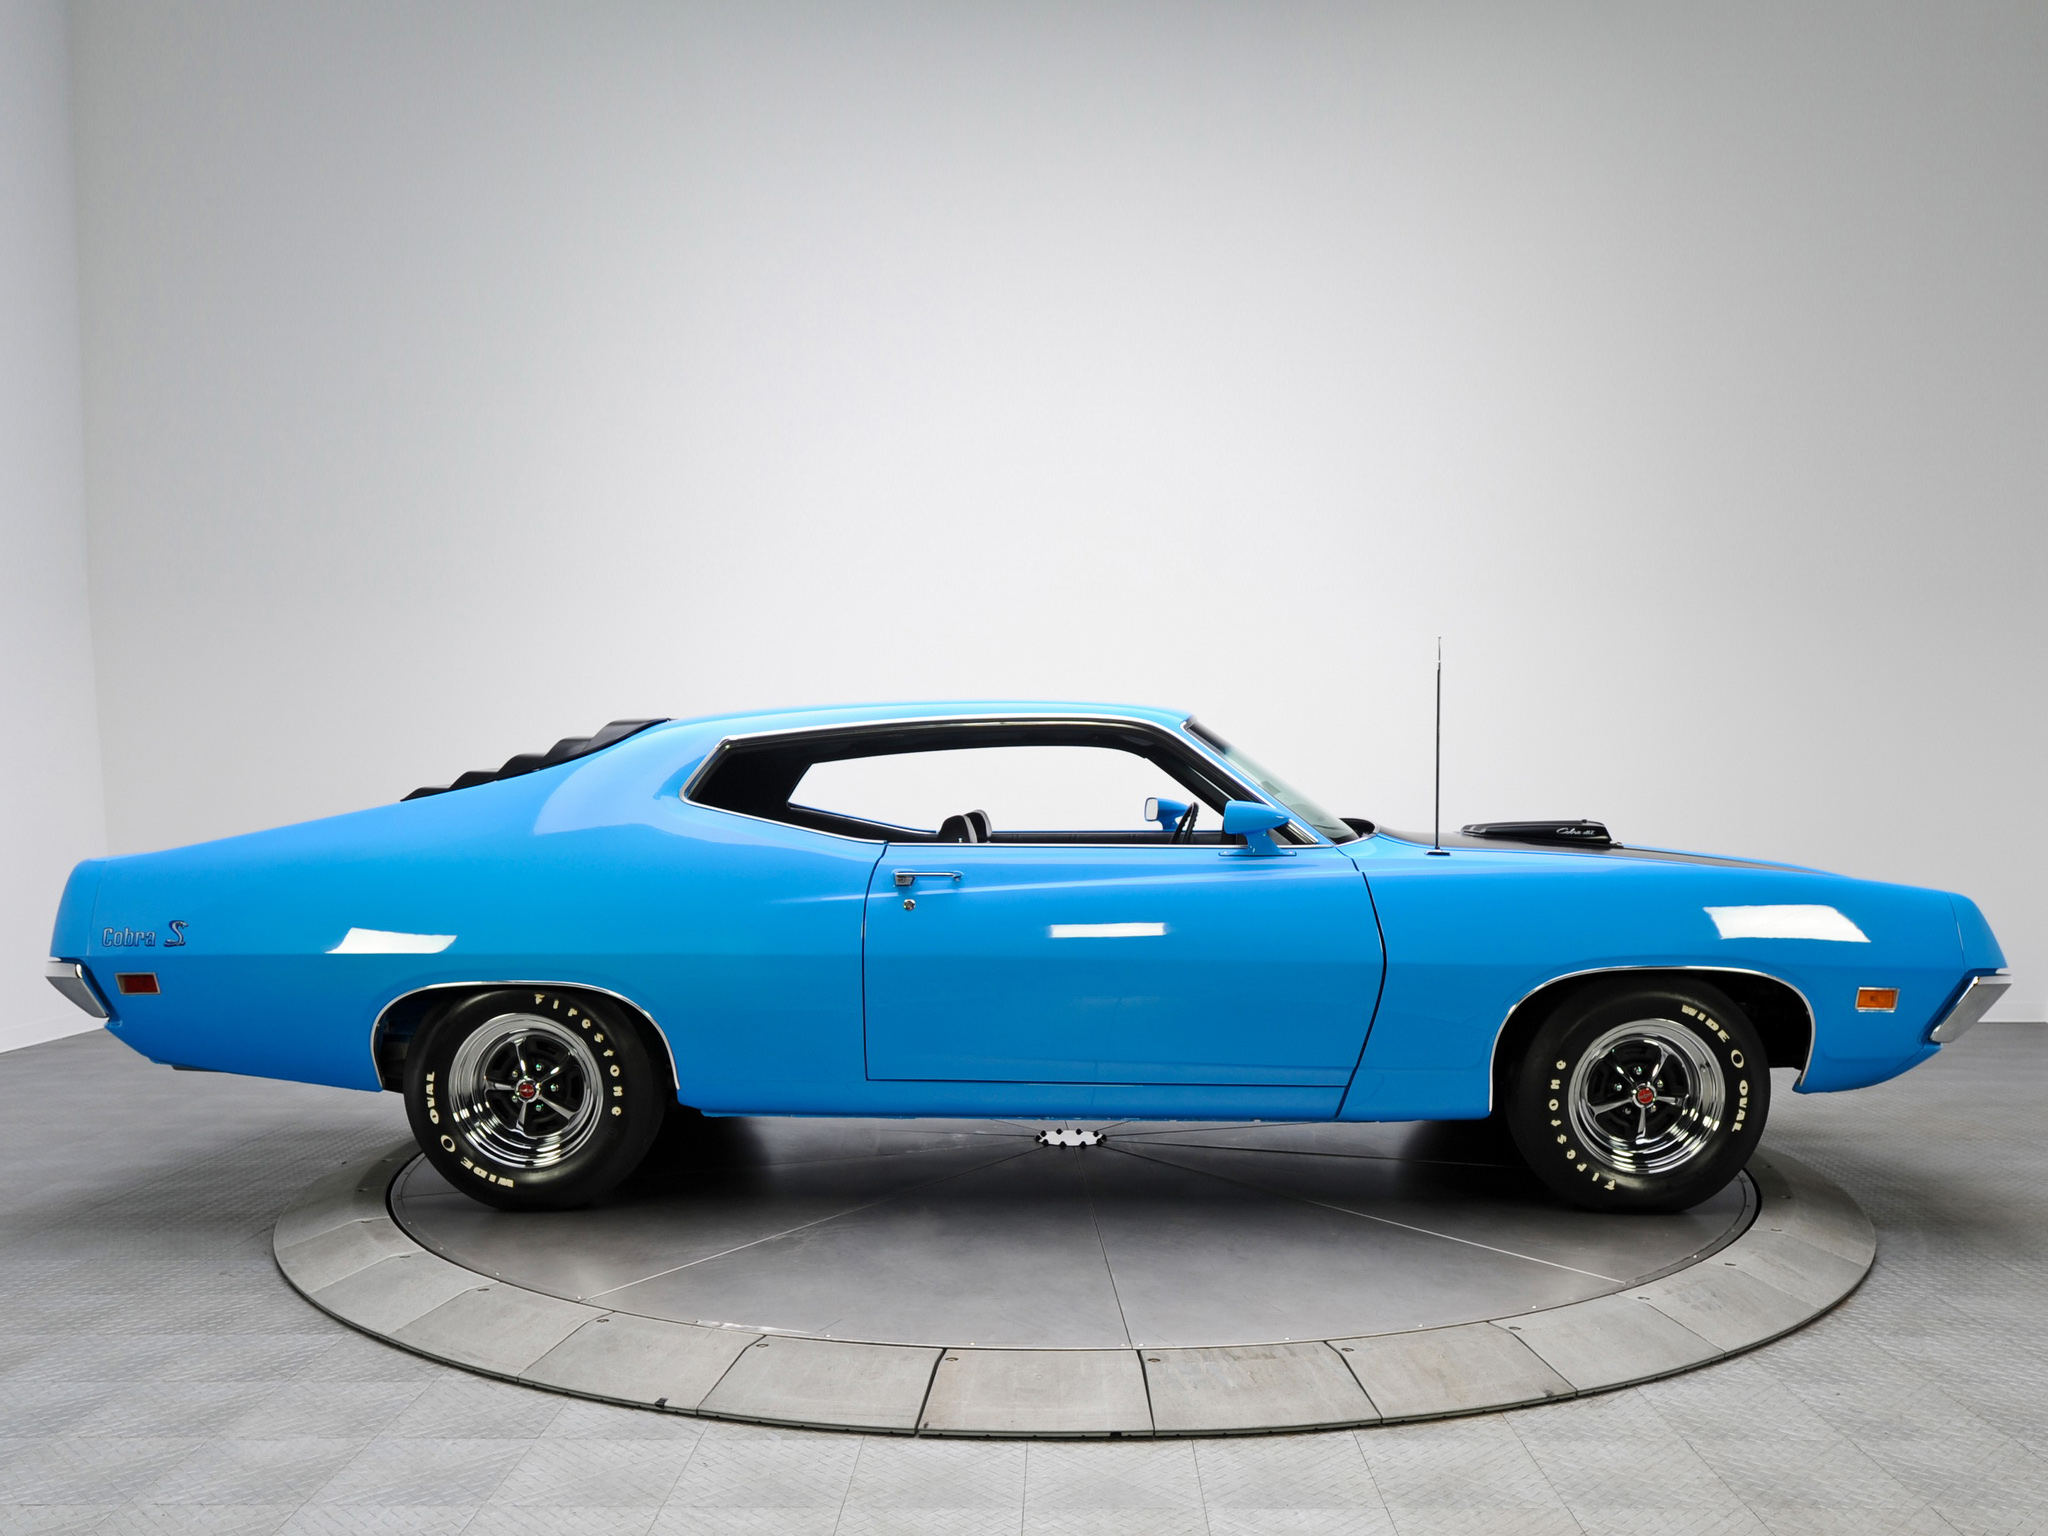 Amazing Ford Torino Cobra Pictures & Backgrounds